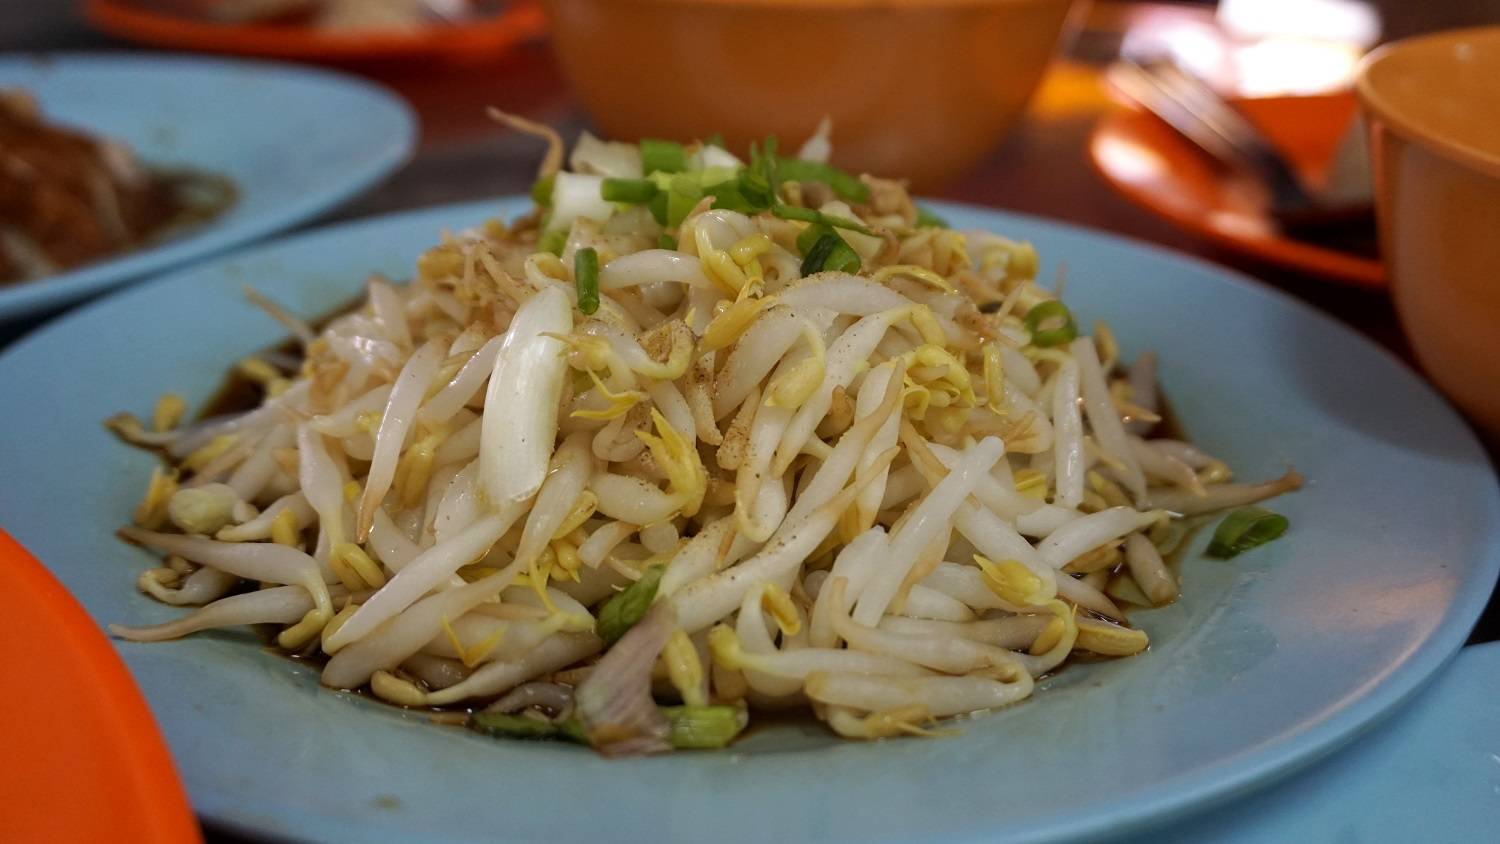 Ipoh’s very own beansprouts! Fat, short, crunchy and juicy...